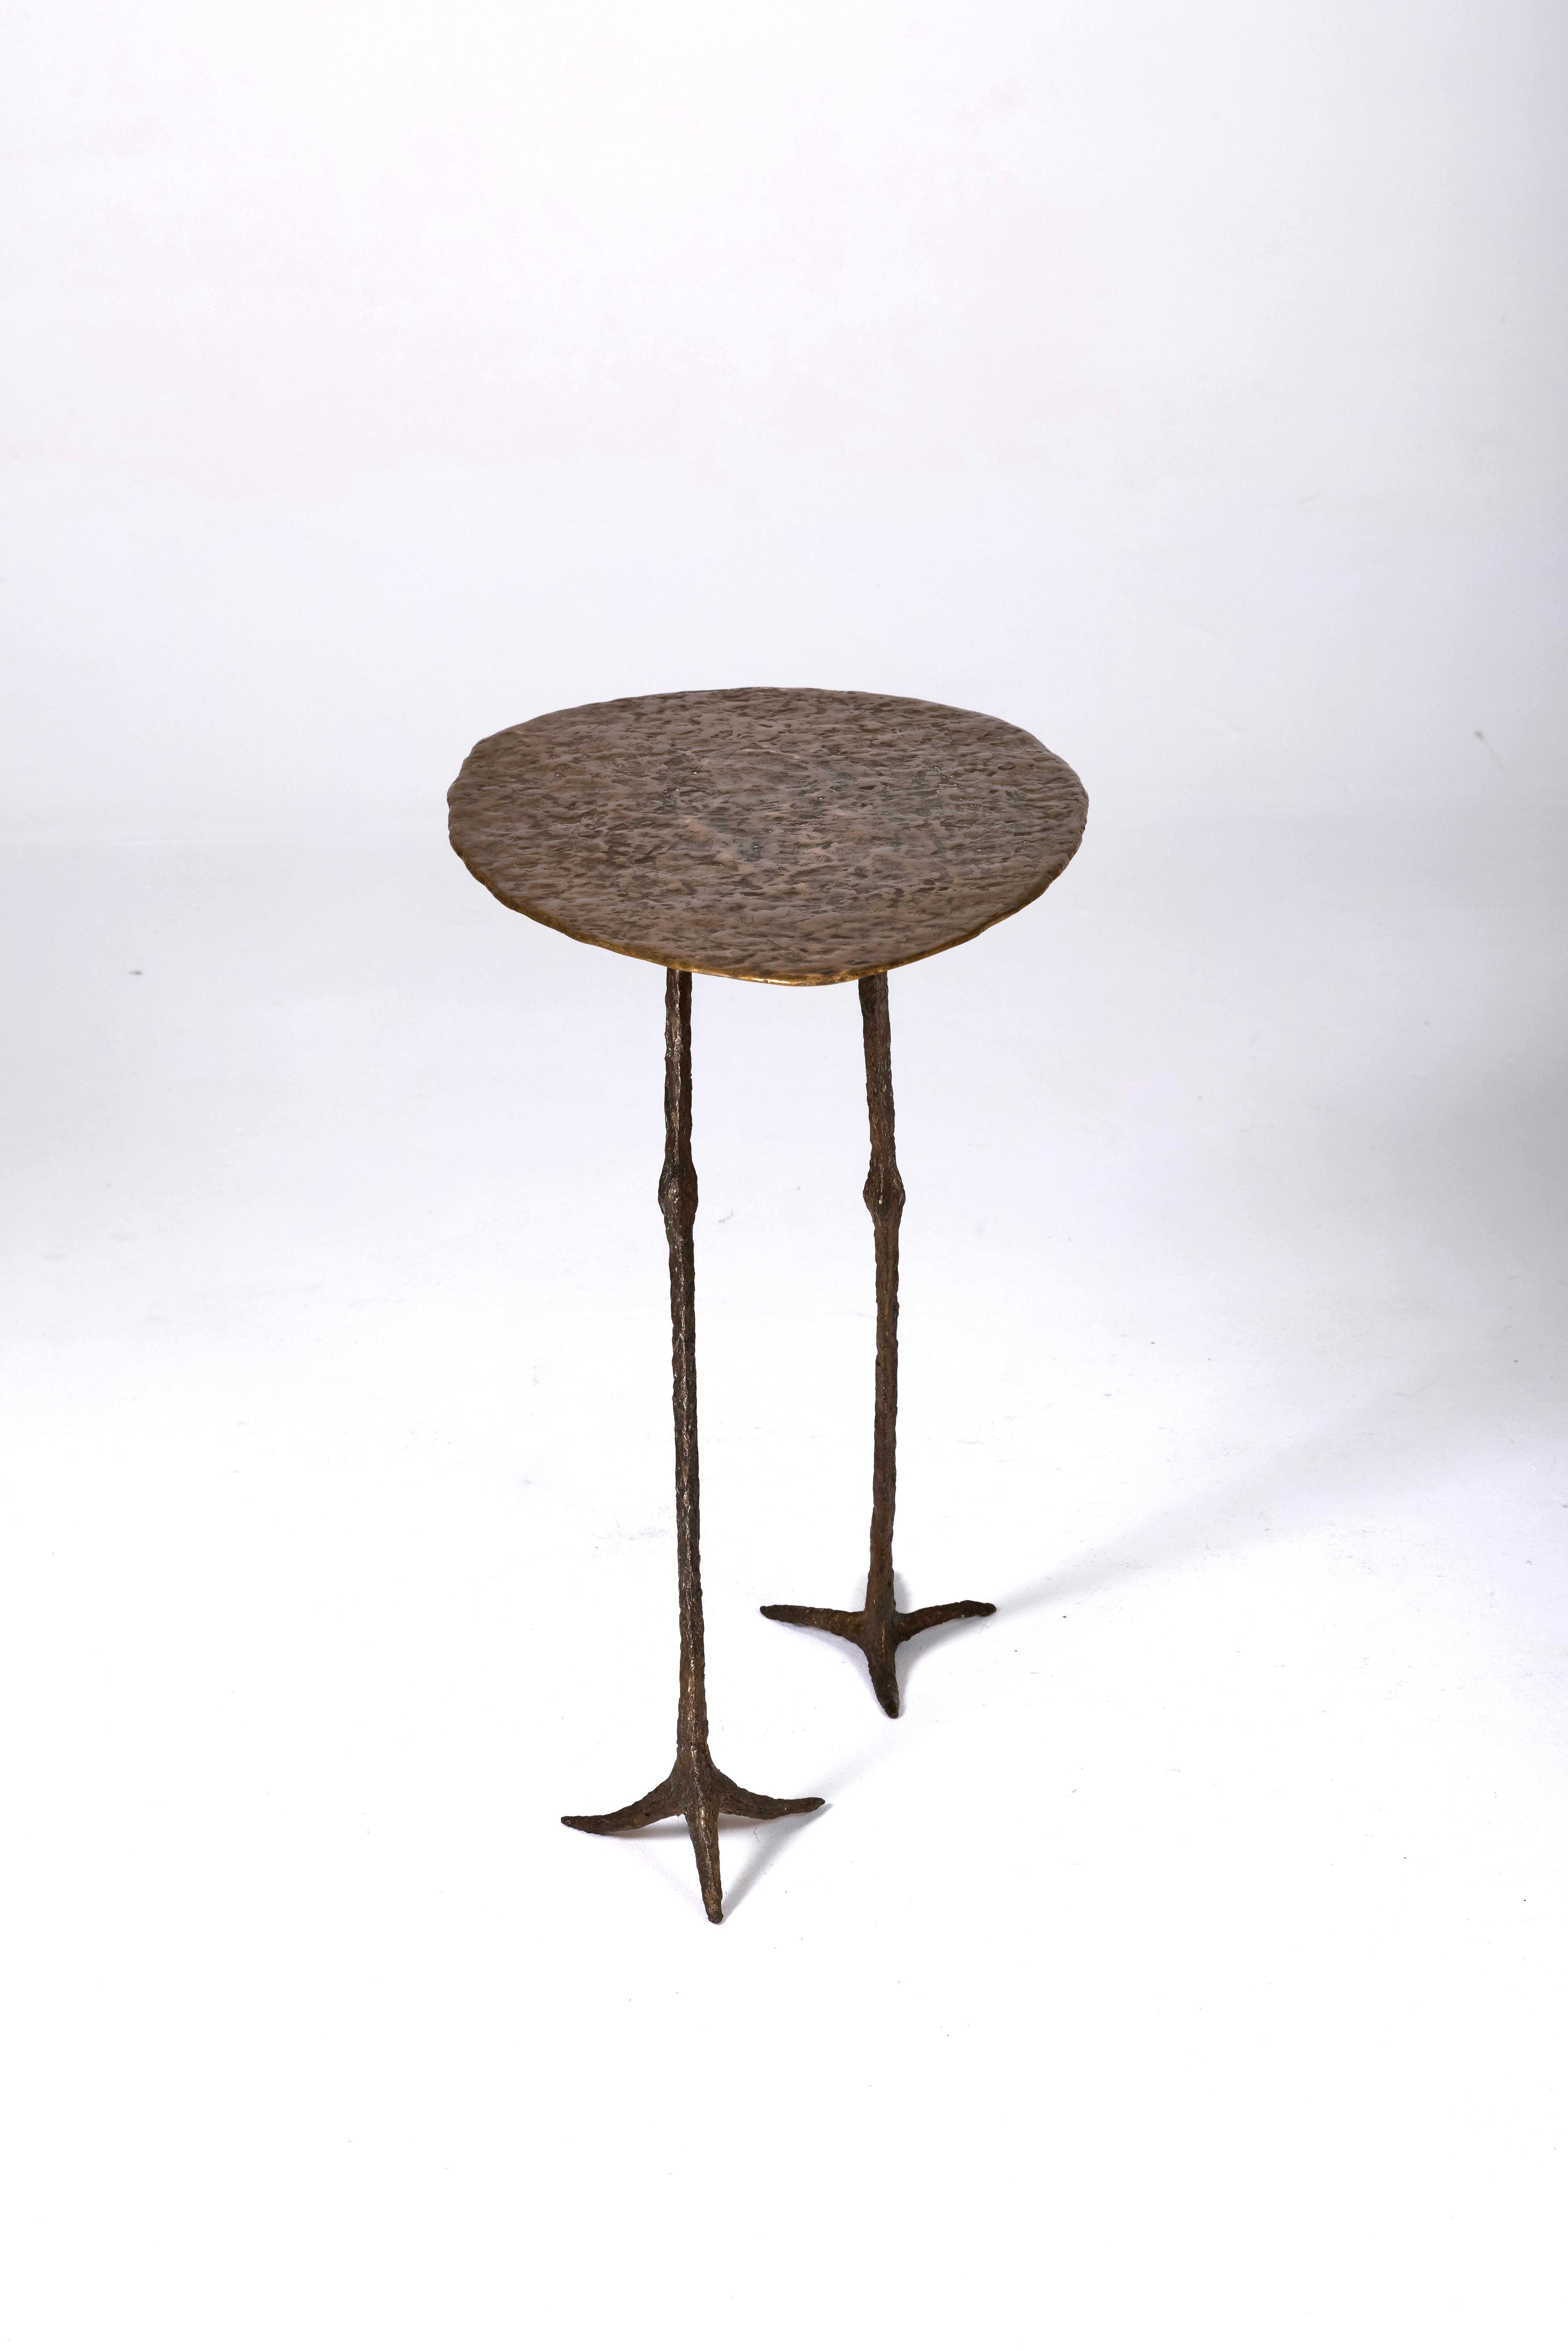 Postmodern bronze side table by designer sylvie mangaud. Exceptional table with a zoomorphic base. This table exists in only 10 copies, it is numbered and signed.

LP1308